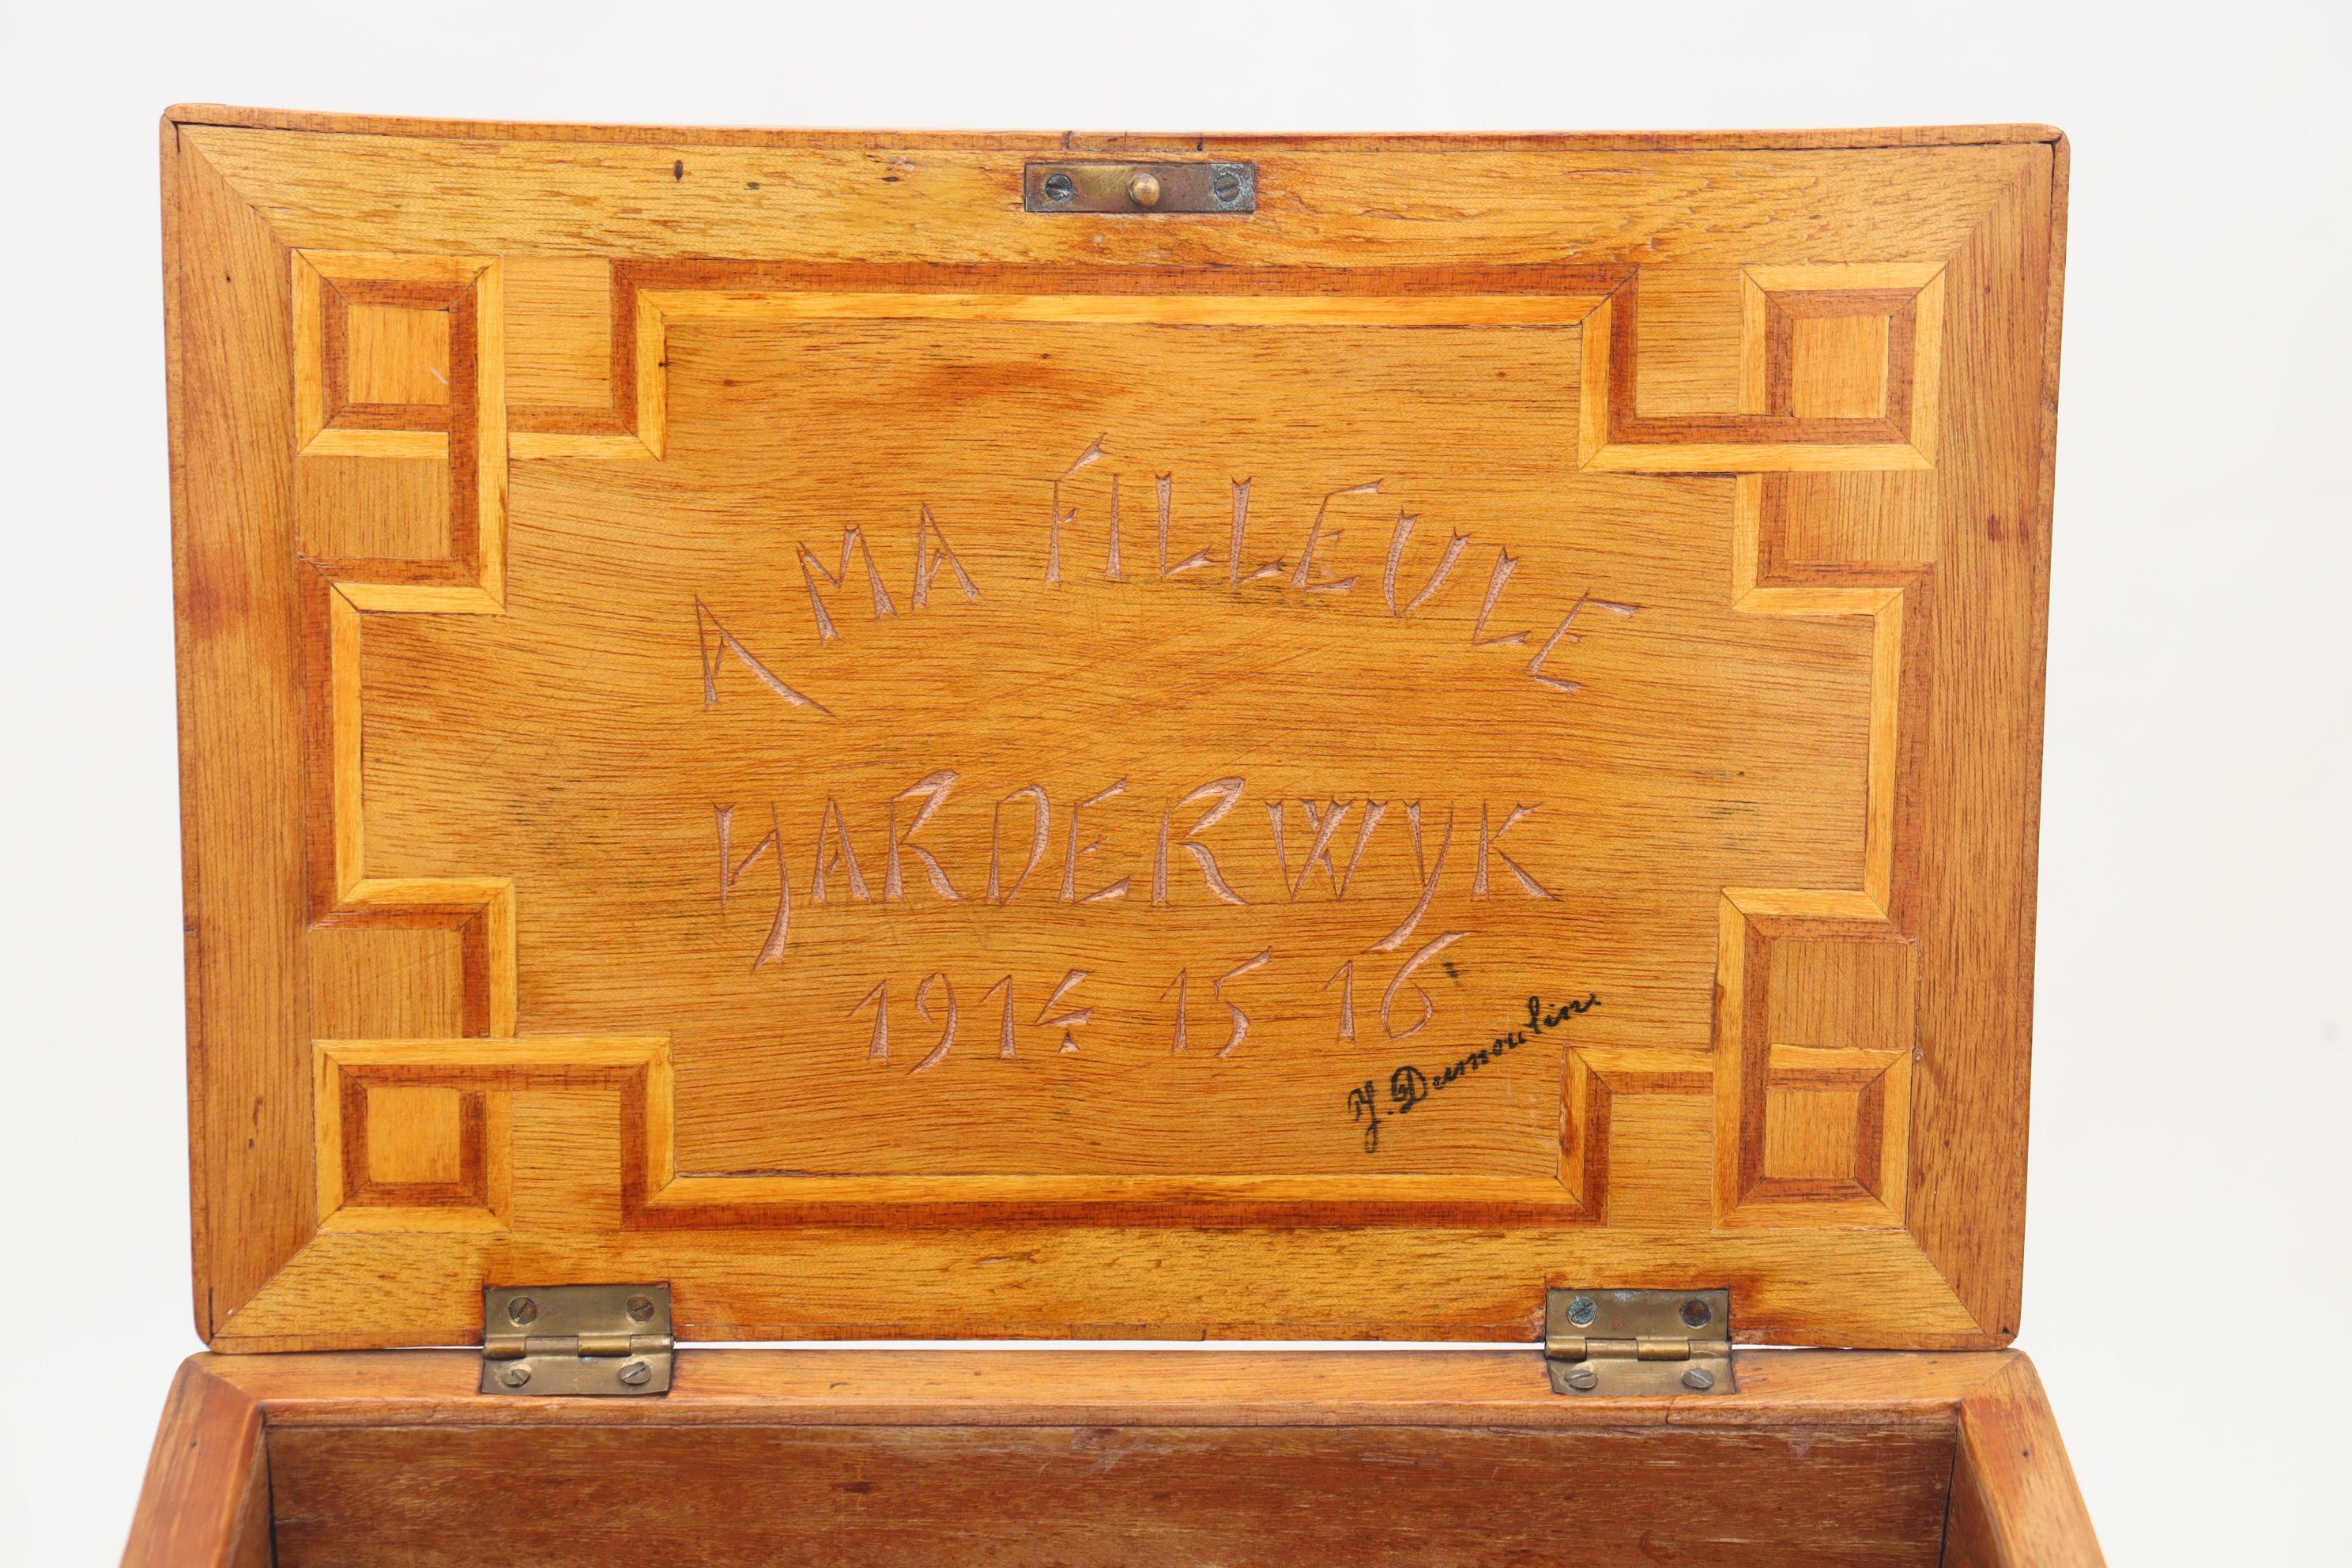 Inlaid box made in Harderwijk internment camp during WW1 In Good Condition For Sale In East Geelong, VIC